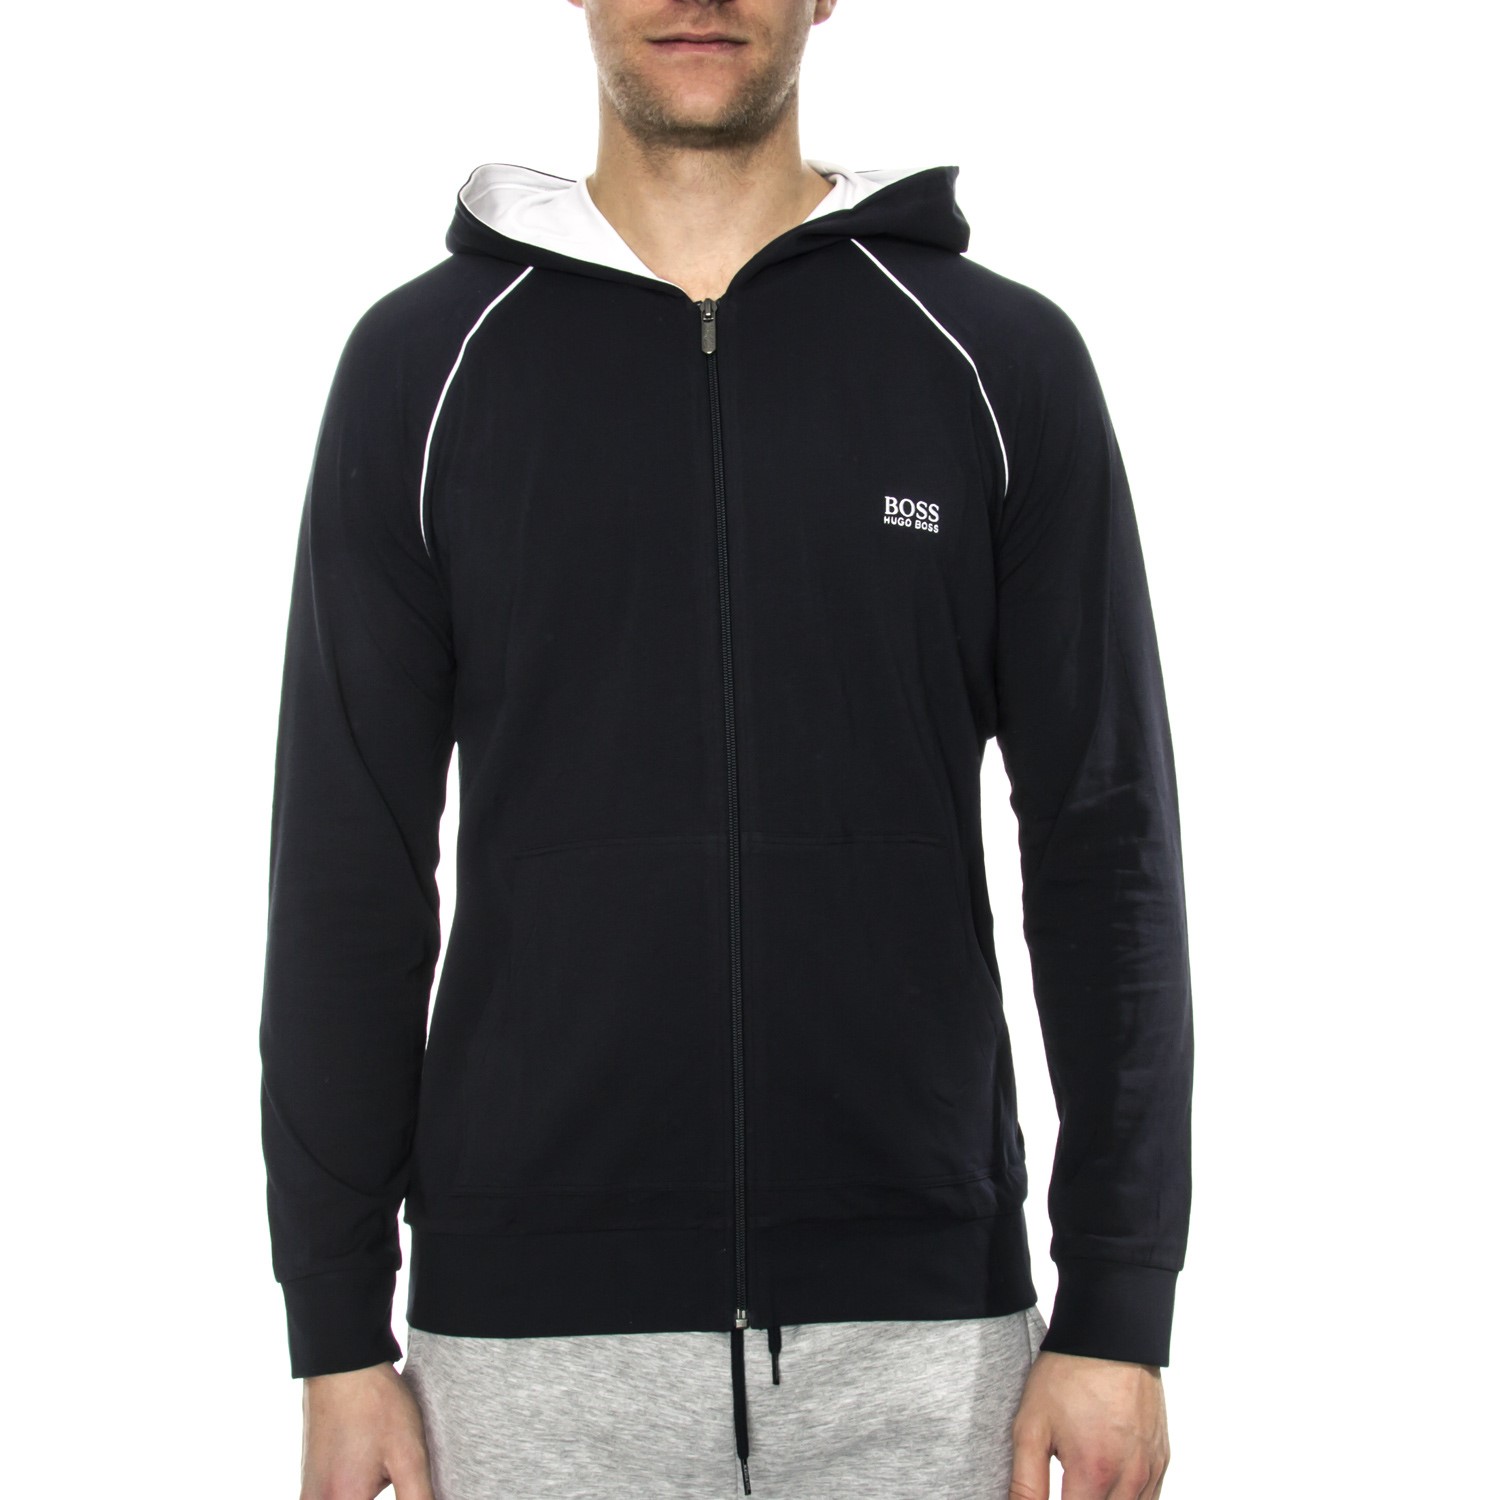 Hugo Boss Mix and Match Jacket H - Sweaters - Clothing - Timarco.eu